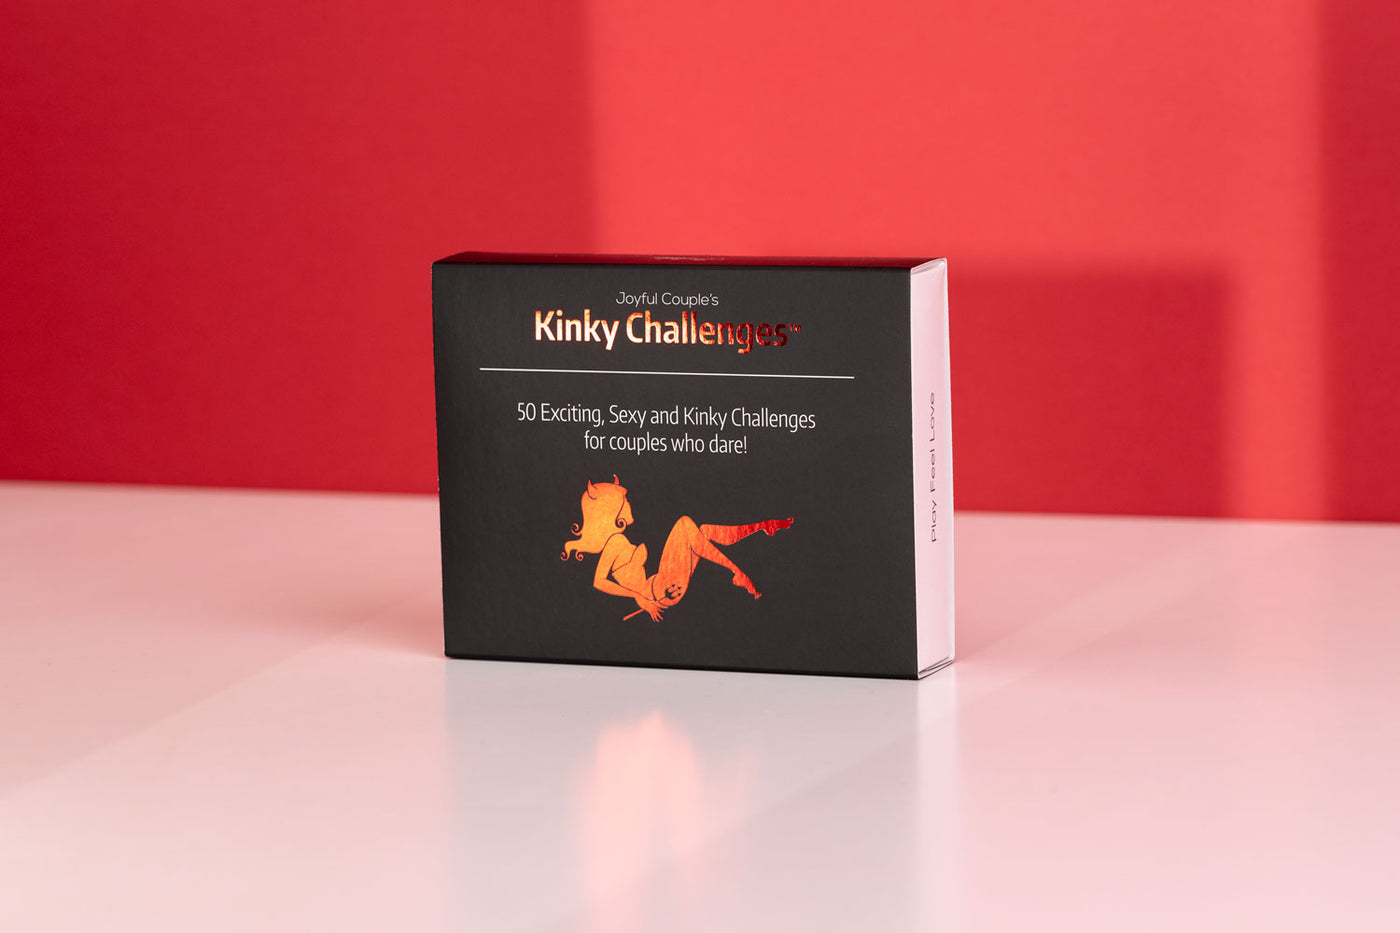 Kinky Cahallenges couple's card game for a hotter relationship